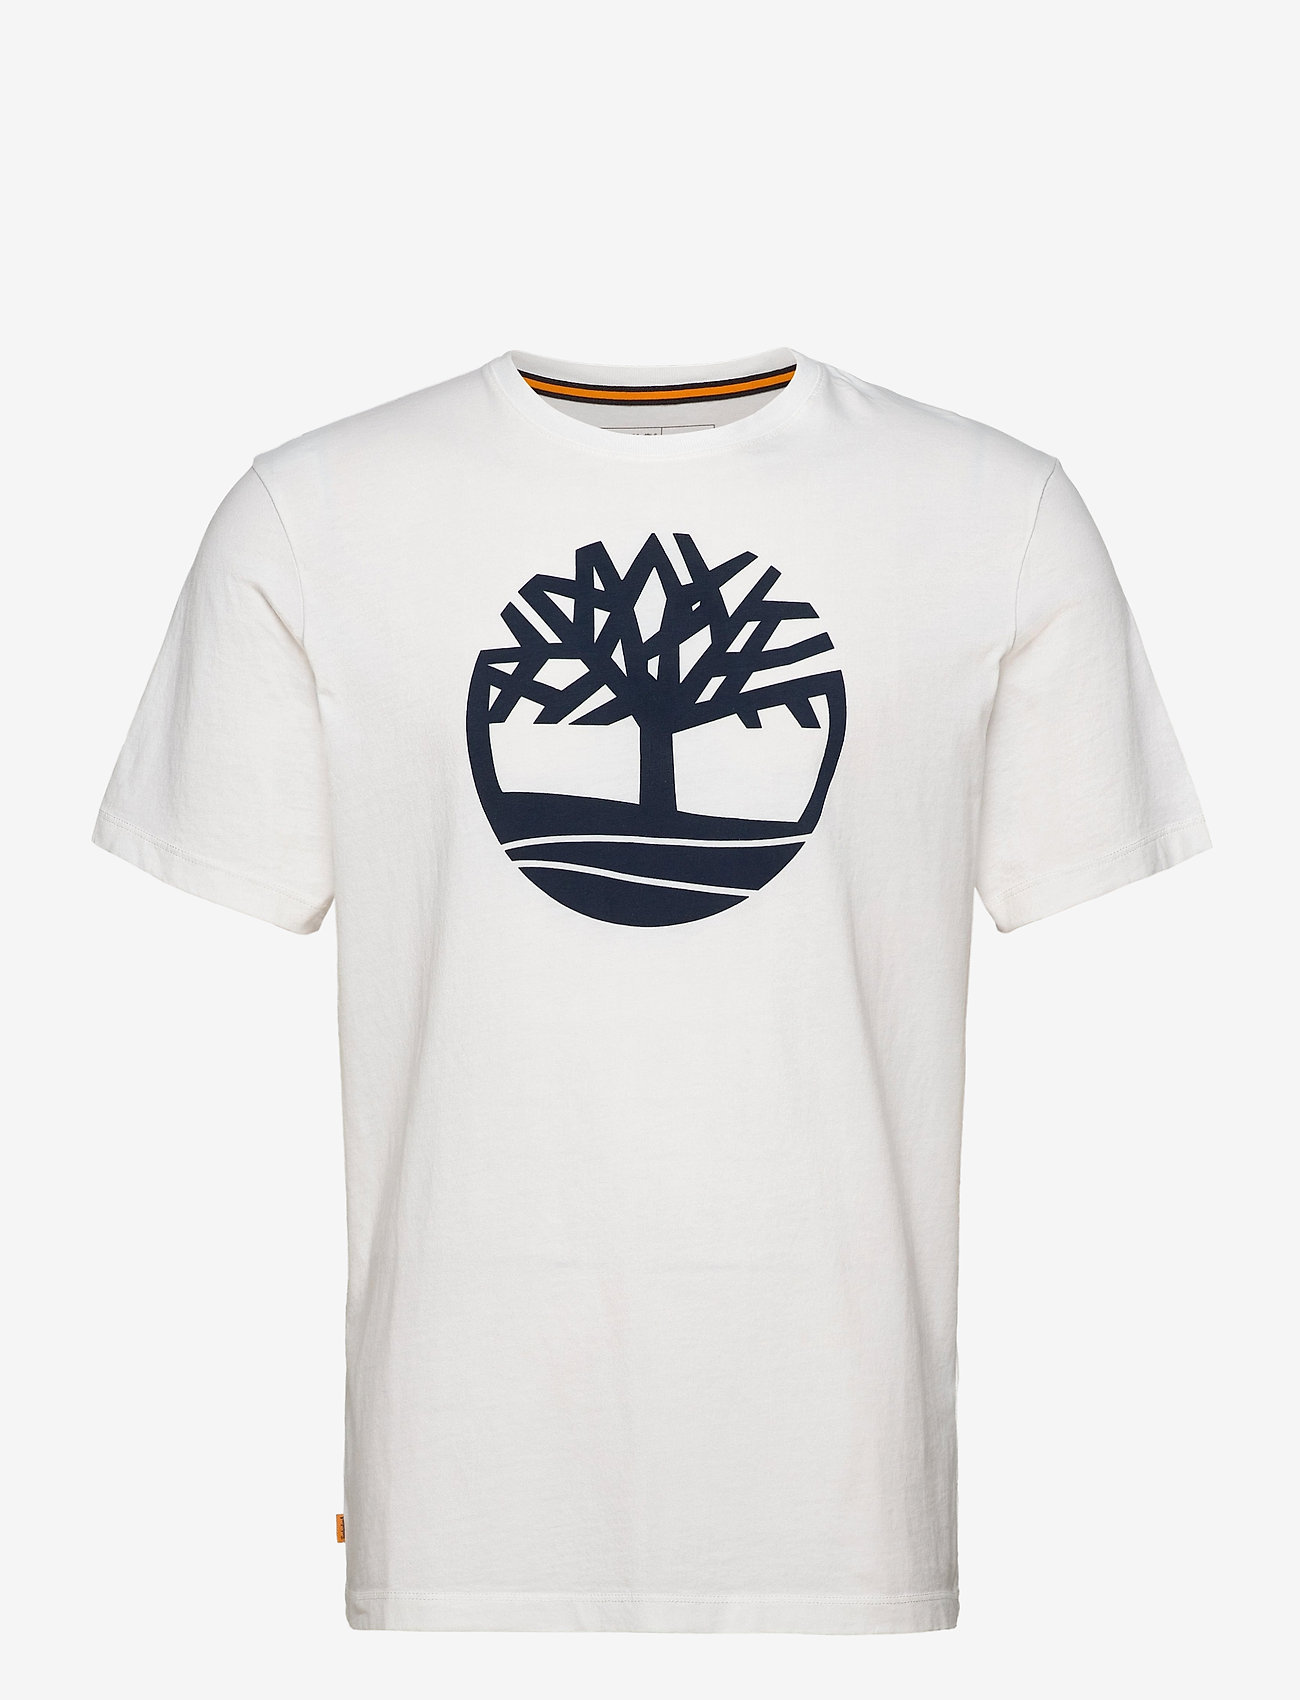 Timberland - KENNEBEC RIVER Tree Logo Short Sleeve Tee WHITE - lowest prices - white - 0